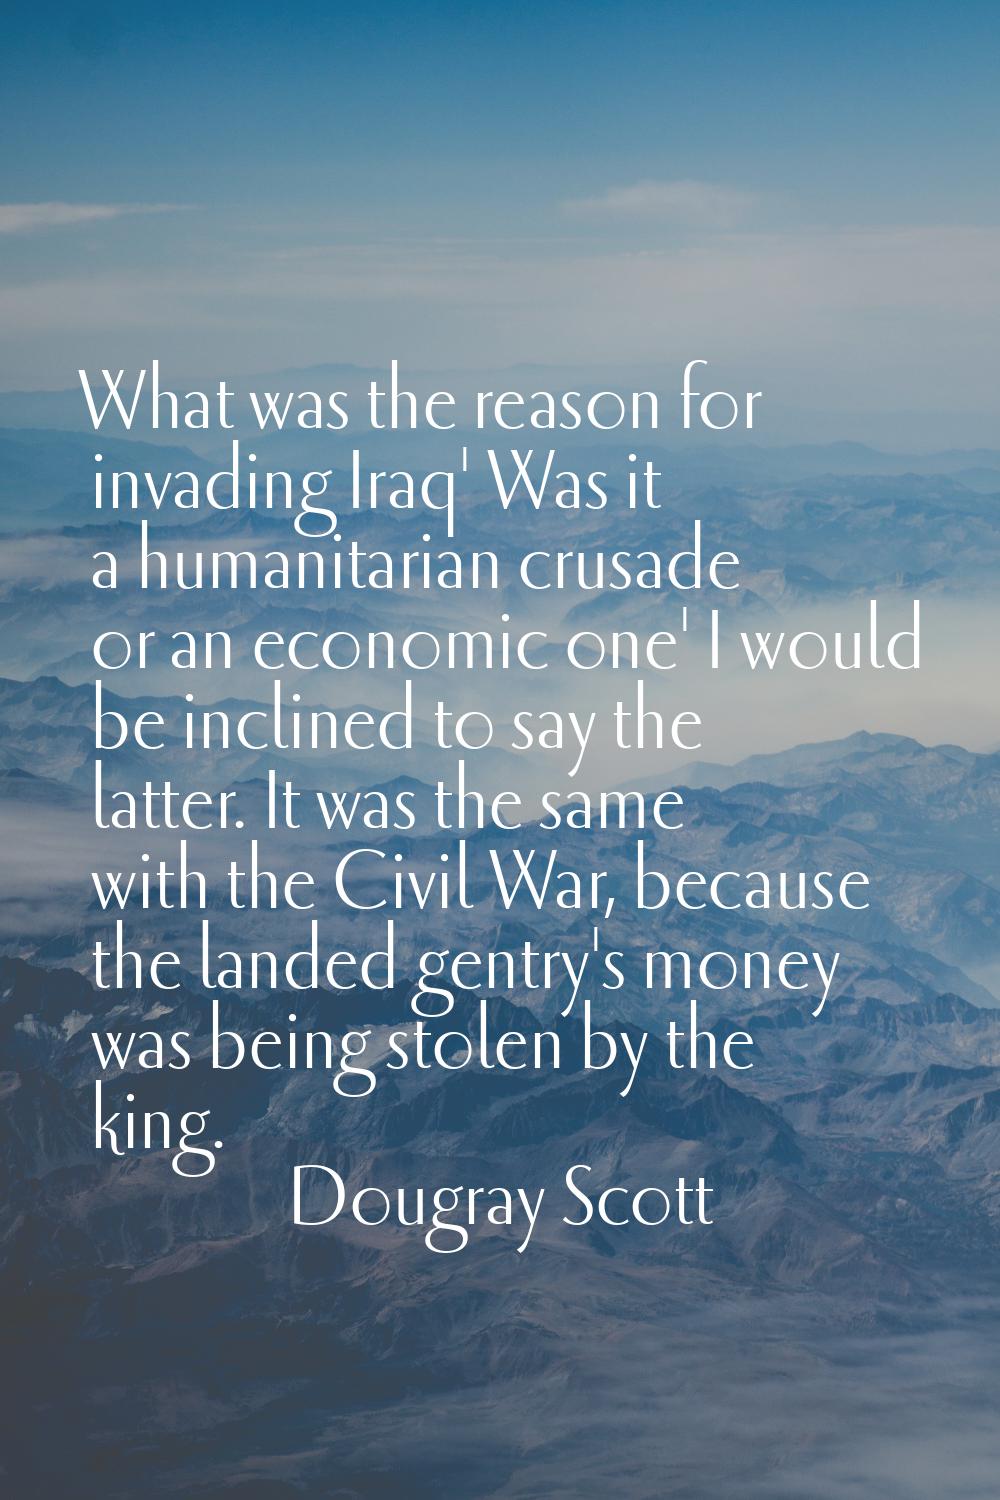 What was the reason for invading Iraq' Was it a humanitarian crusade or an economic one' I would be